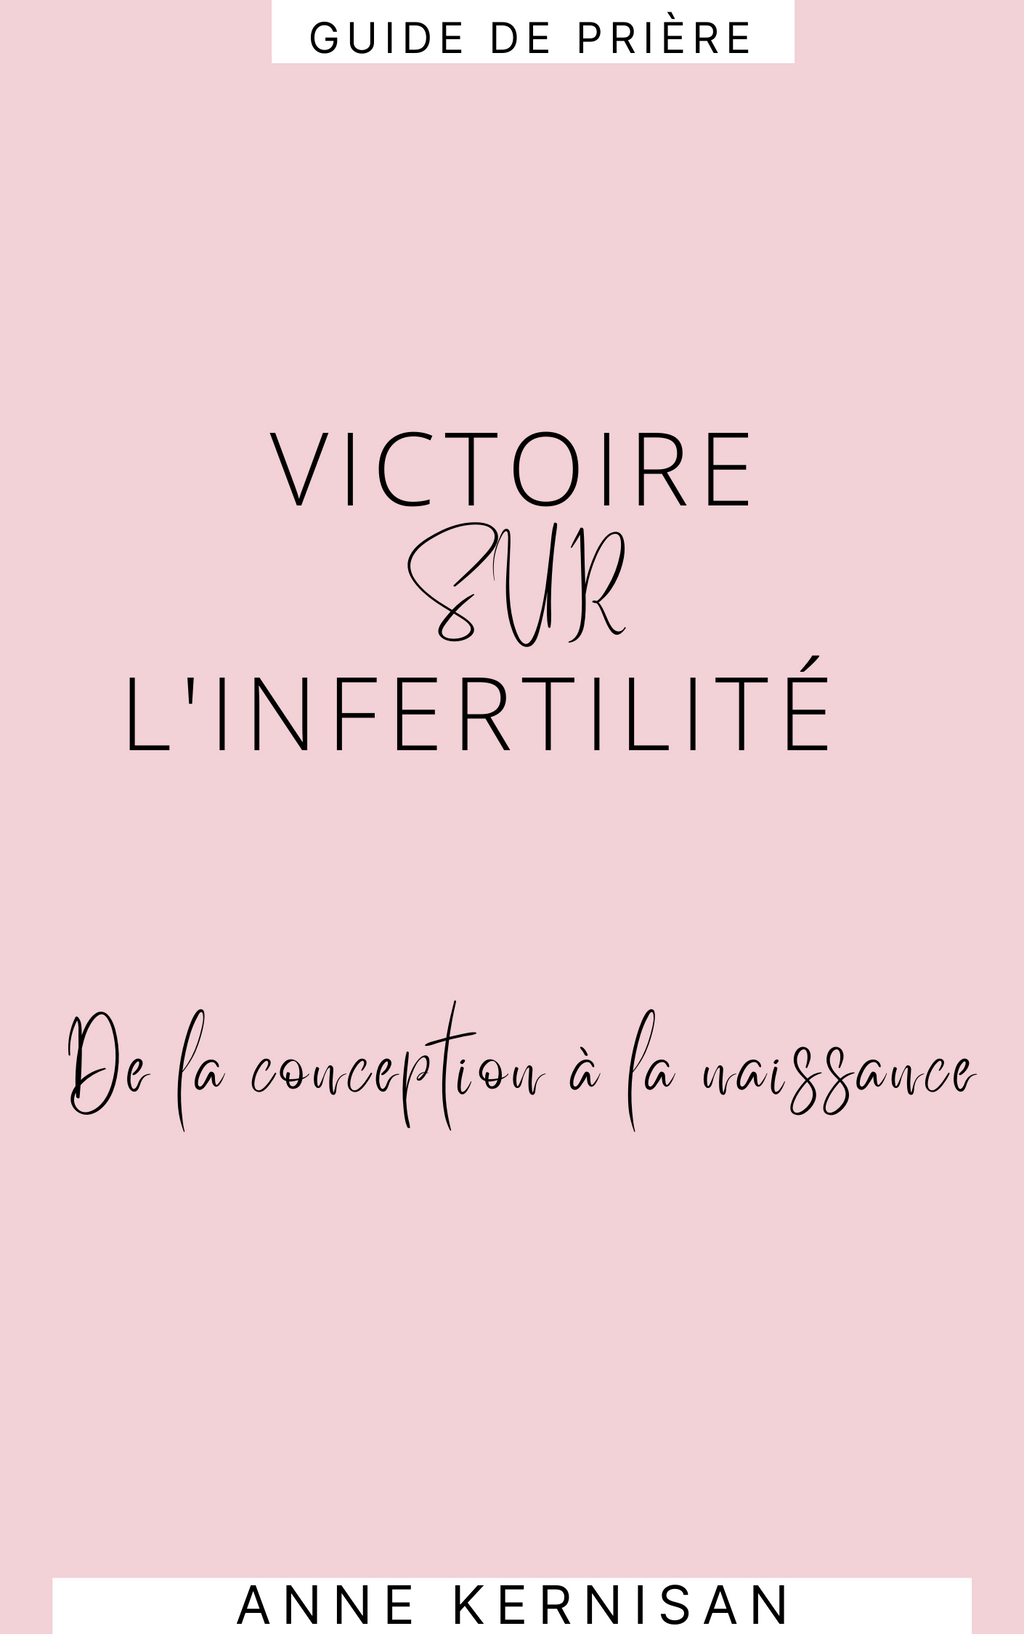 VICTORY OVER INFERTILITY-French Prayer Guide (E-Book)